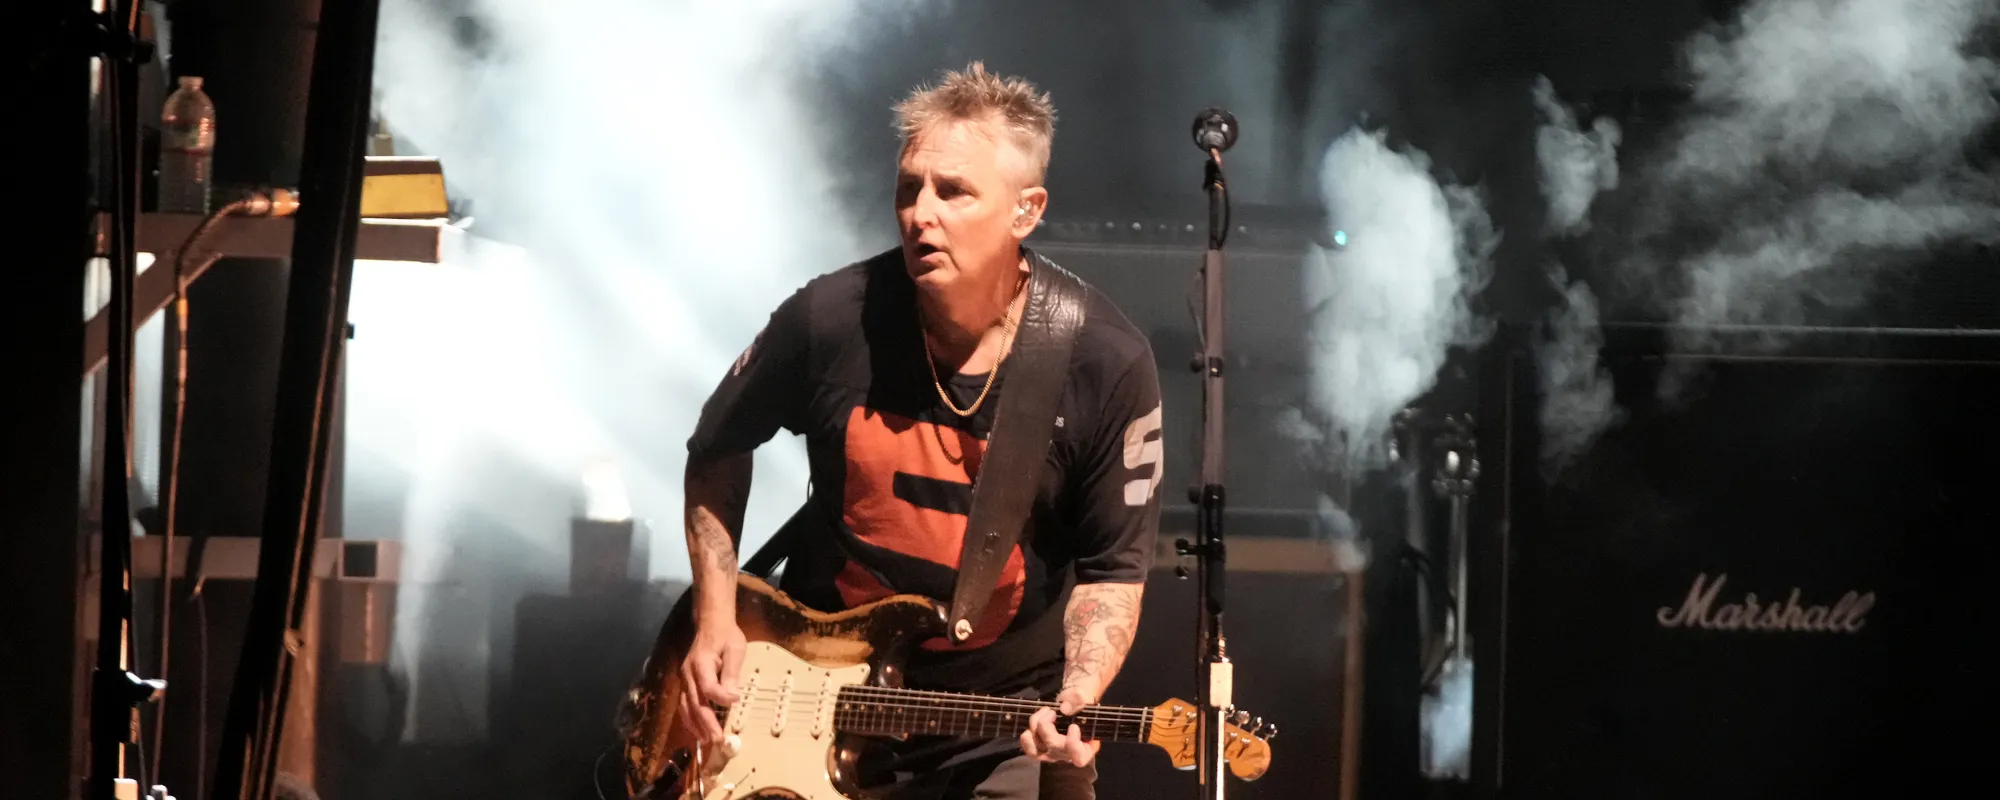 Pearl Jam’s Mike McCready Shares Heartfelt Tribute to Chris Cornell with “Crying Moon”